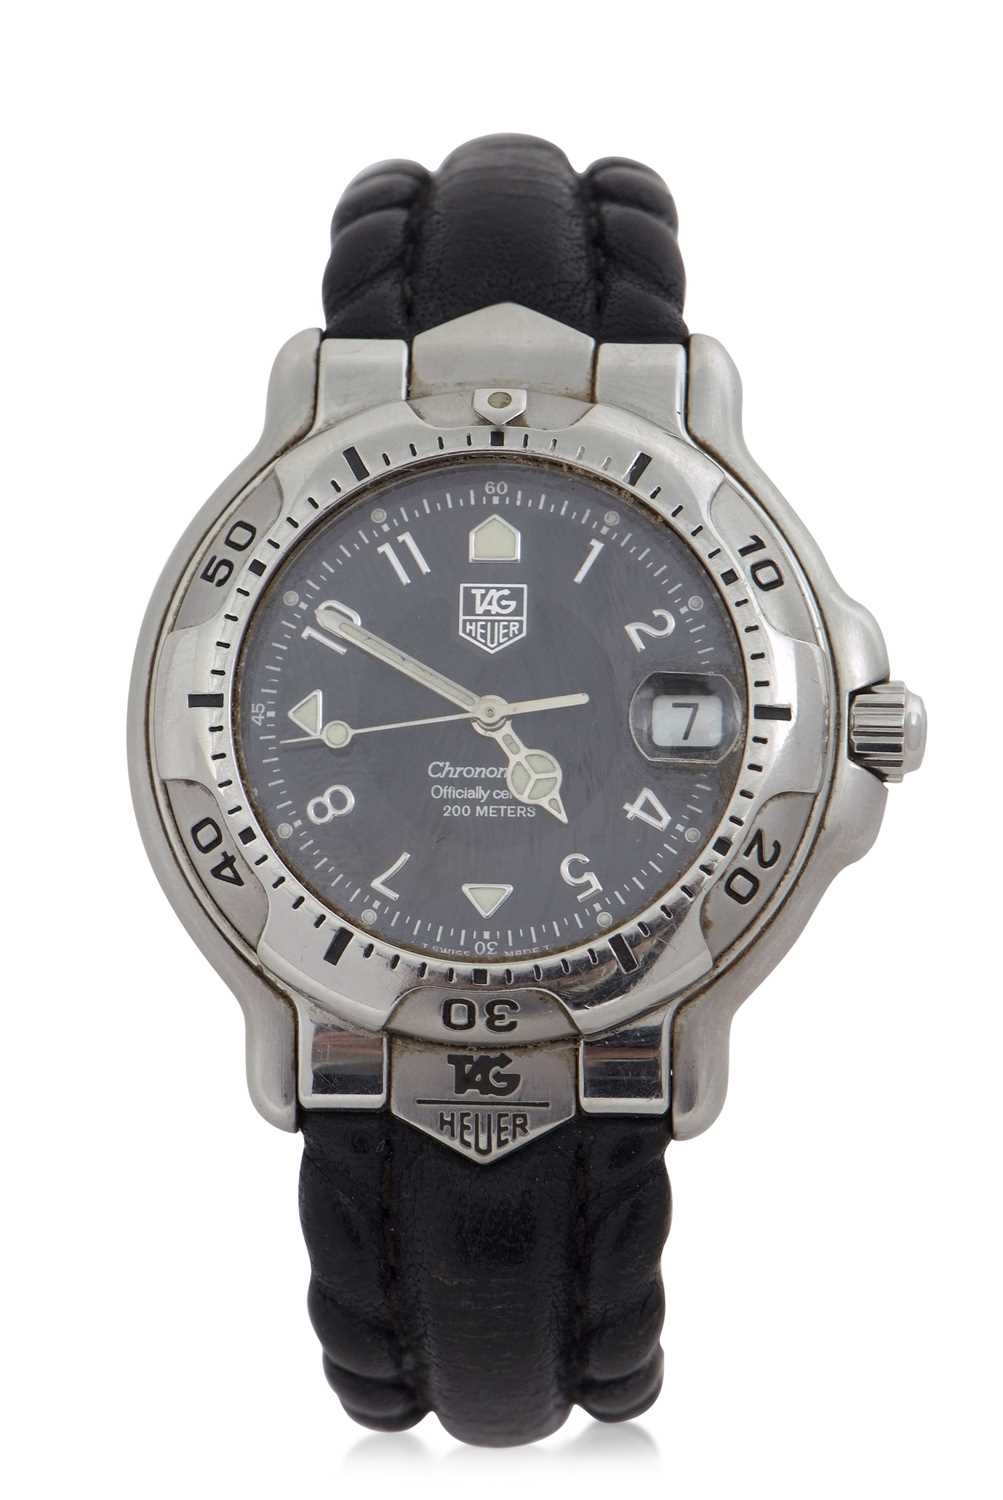 A Tag Heuer automatic gents wristwatch, reference number WH5111-K1, the watch has its original box